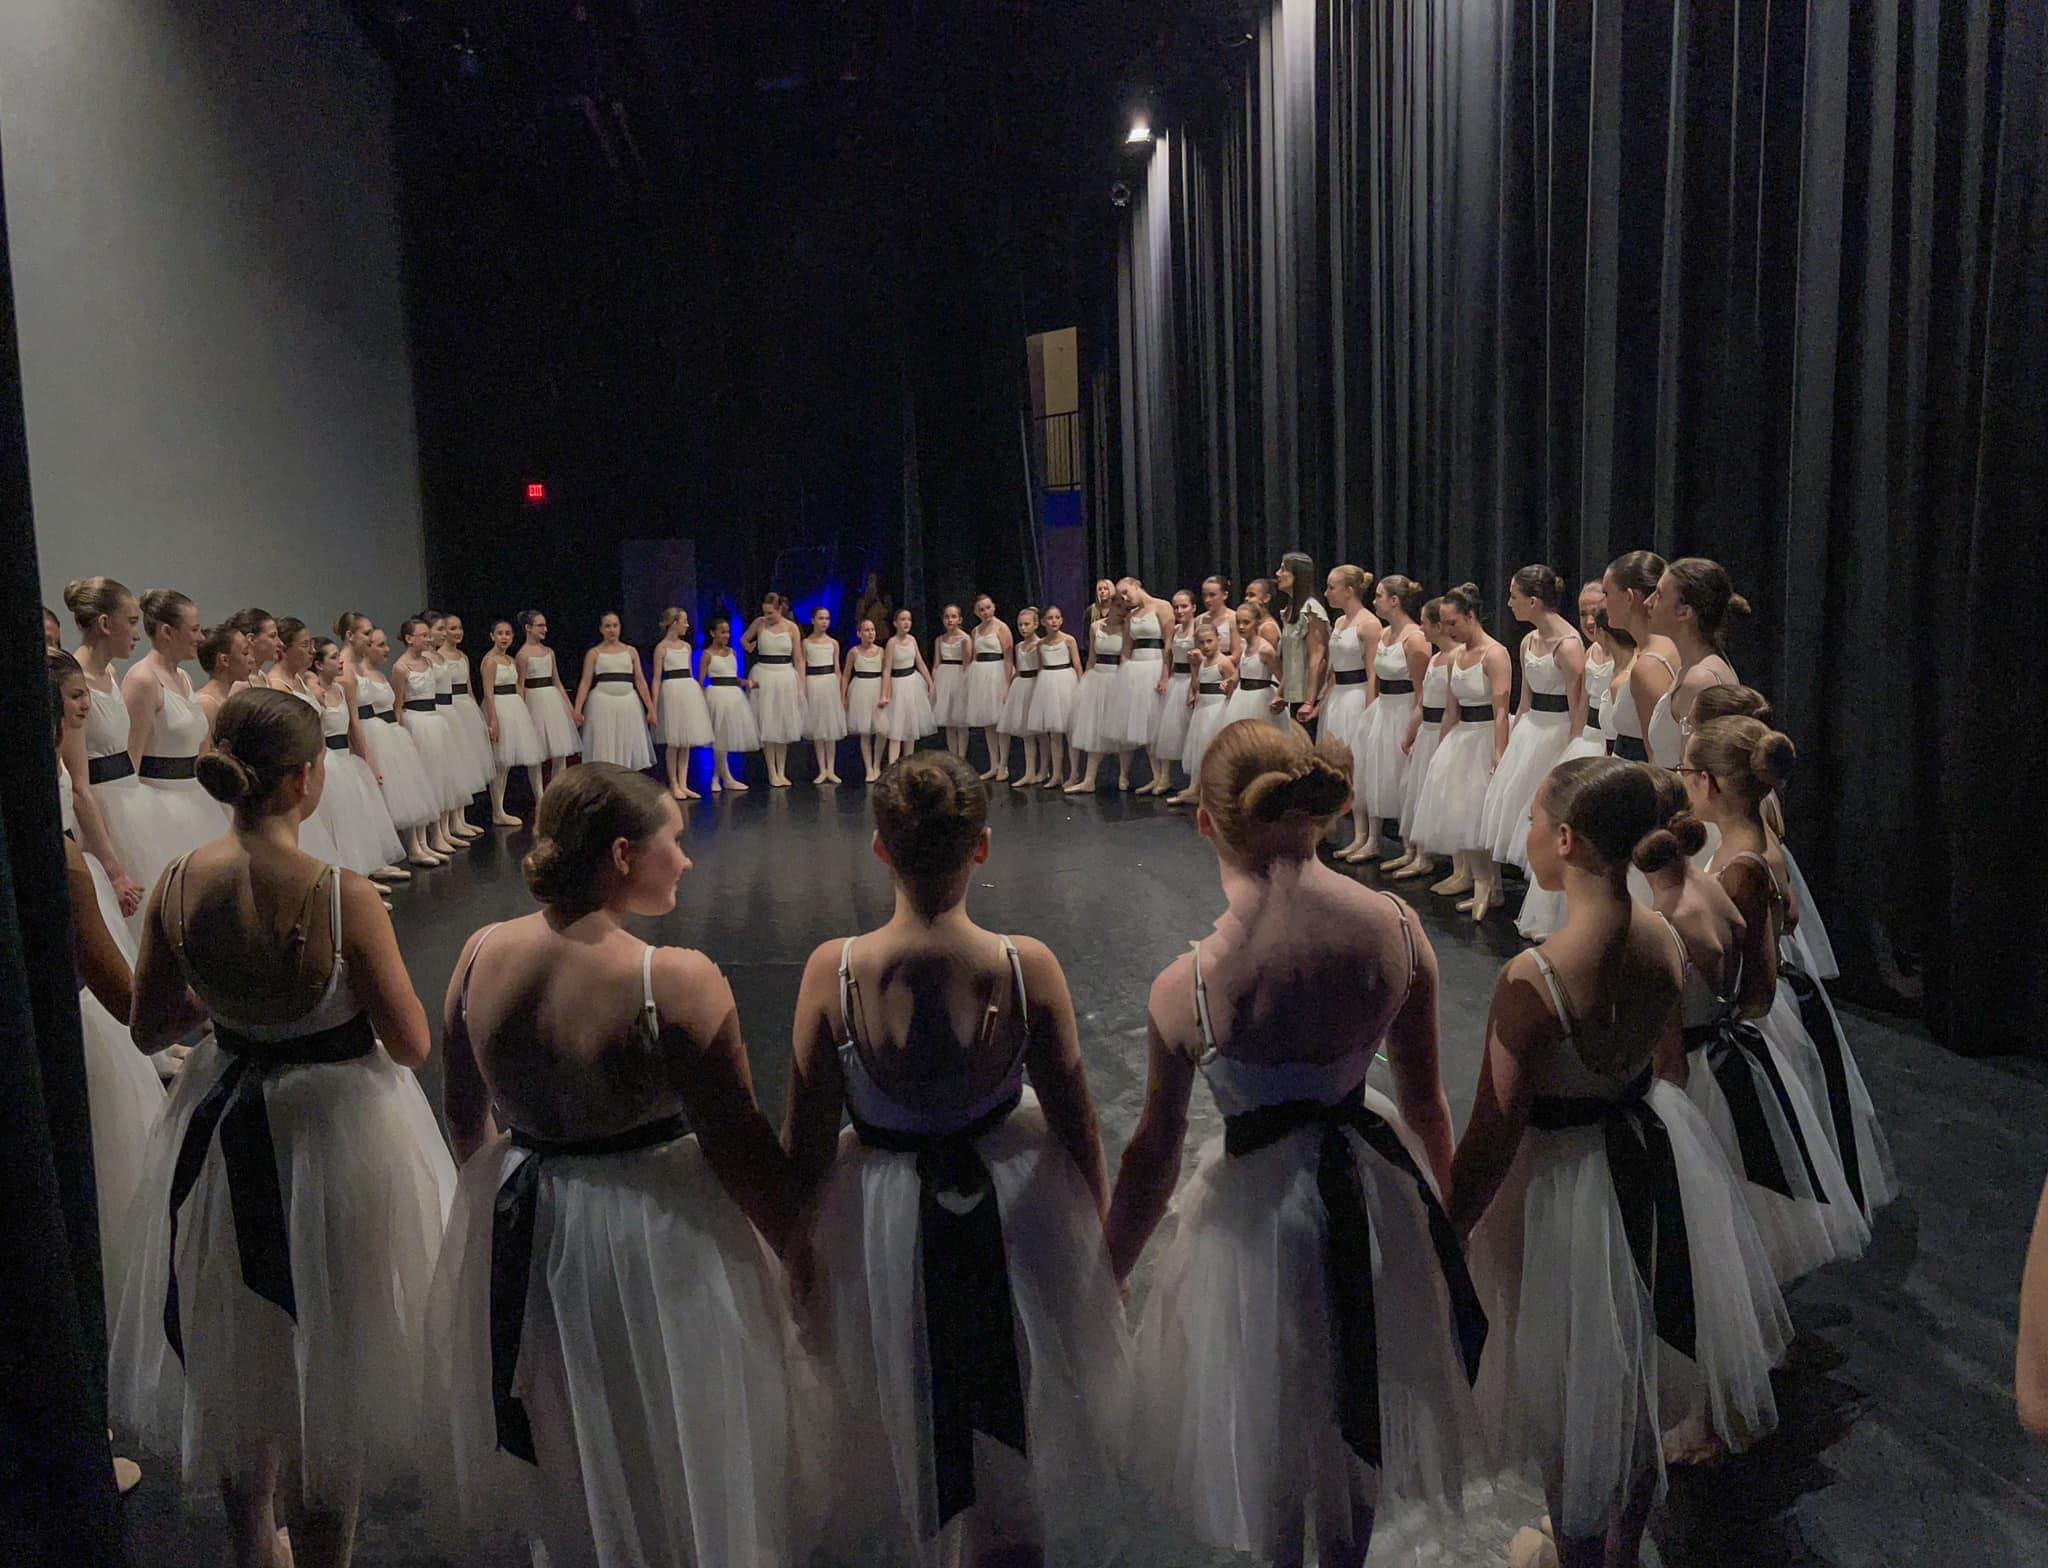 Turning Pointe Academy of Dance: Cultivating Artistic Excellence in Maryville